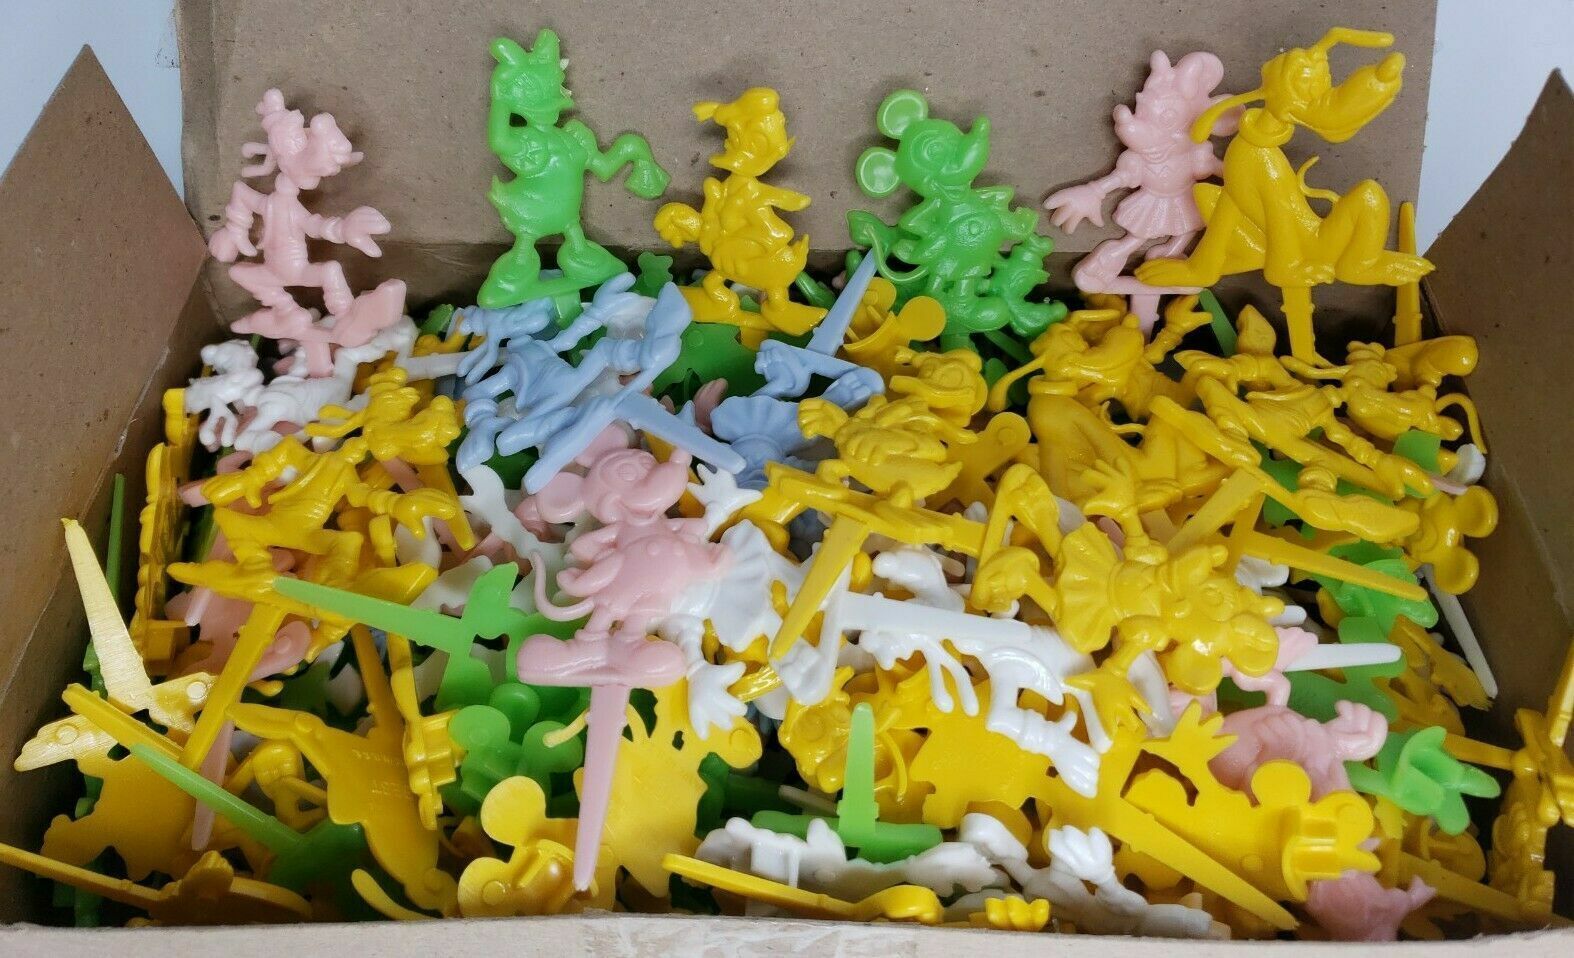 144 Vintage 1950 Licensed Disney Character Cake Toppers New in Box V3 - $32.99